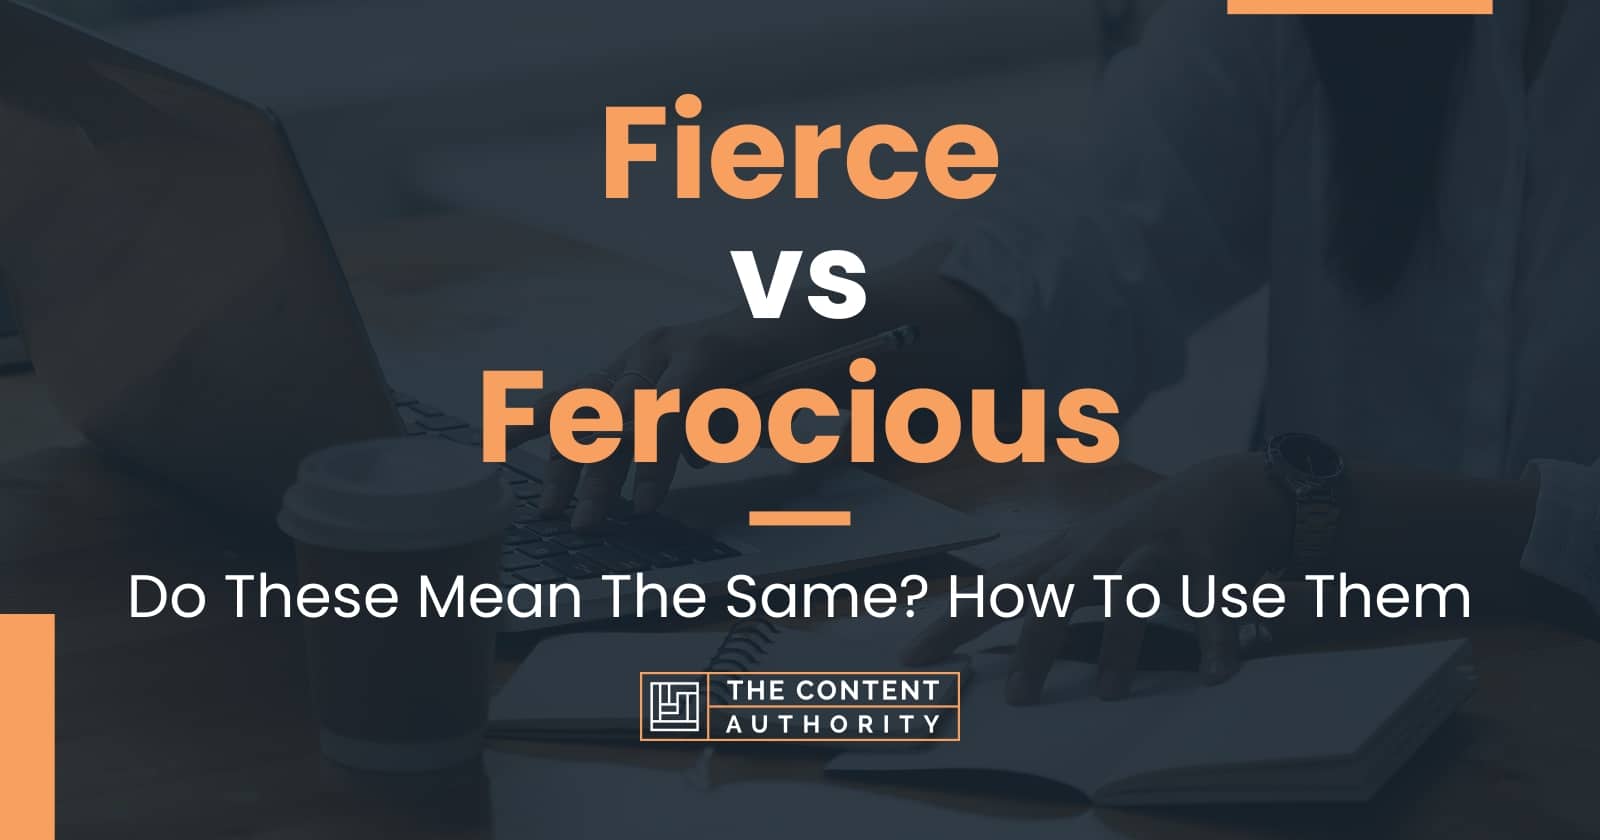 Fierce vs Ferocious: Do These Mean The Same? How To Use Them